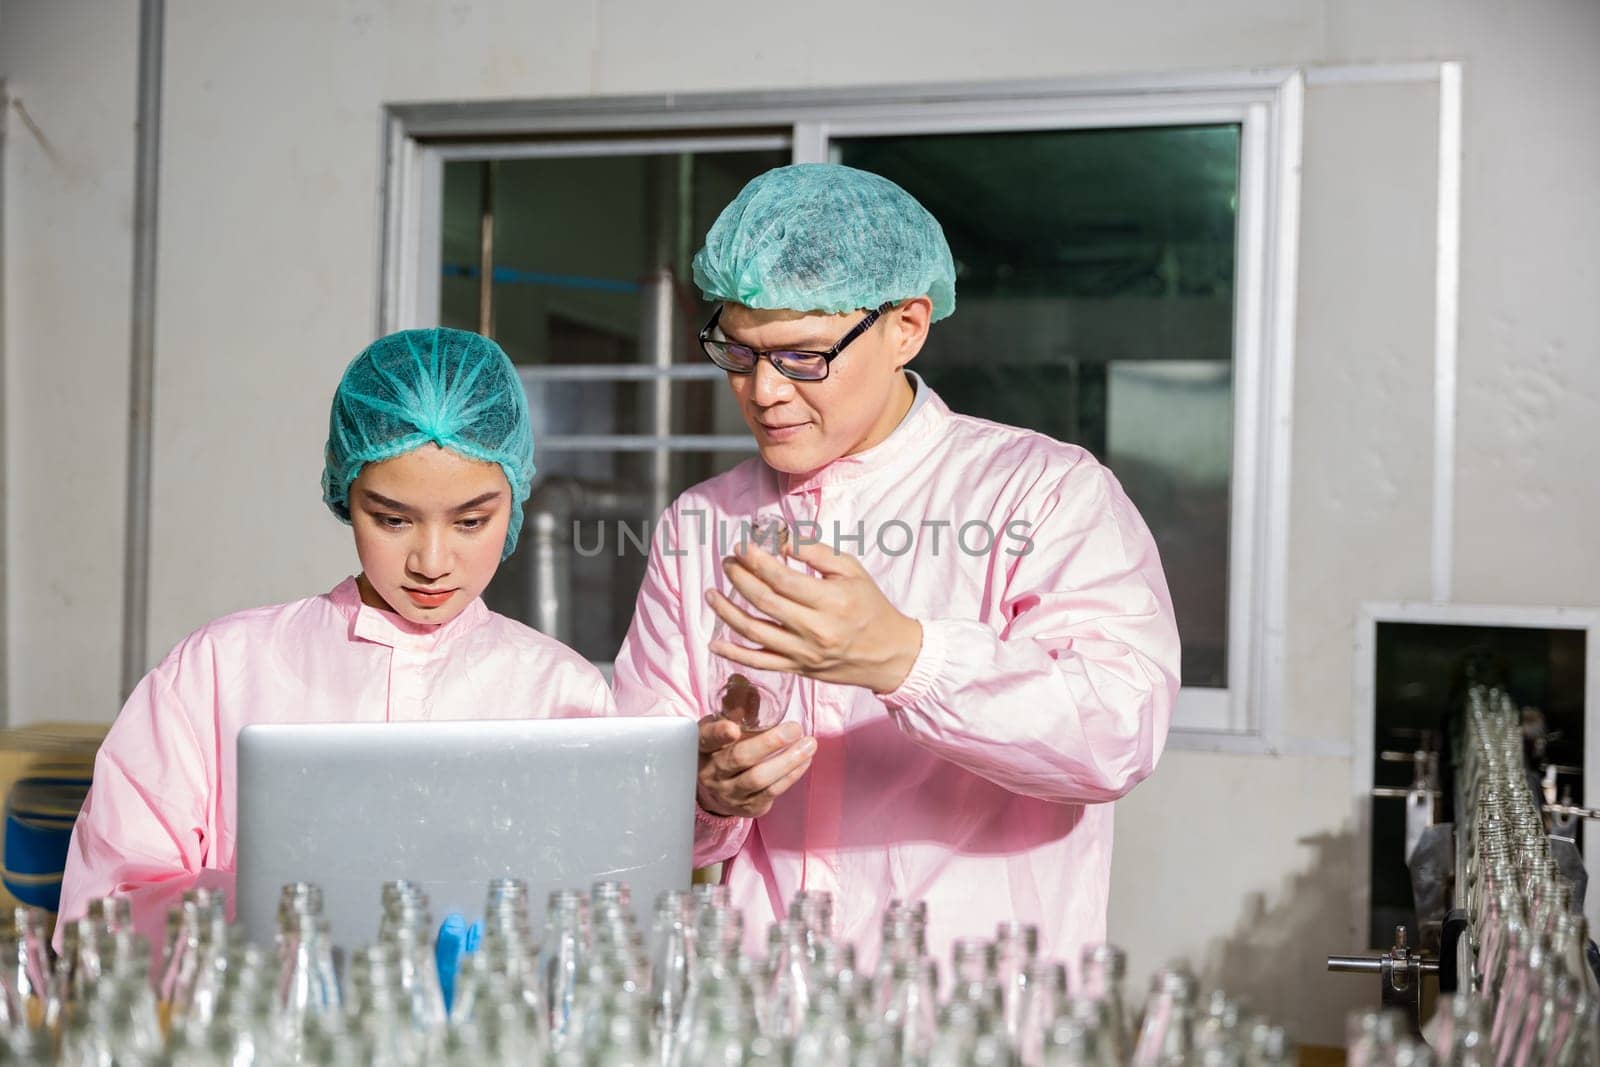 Two engineers conduct product bottle checks on a beverage factory's conveyor belt. Inspection and quality control handled by skilled professionals using a laptop for meticulous scrutiny.